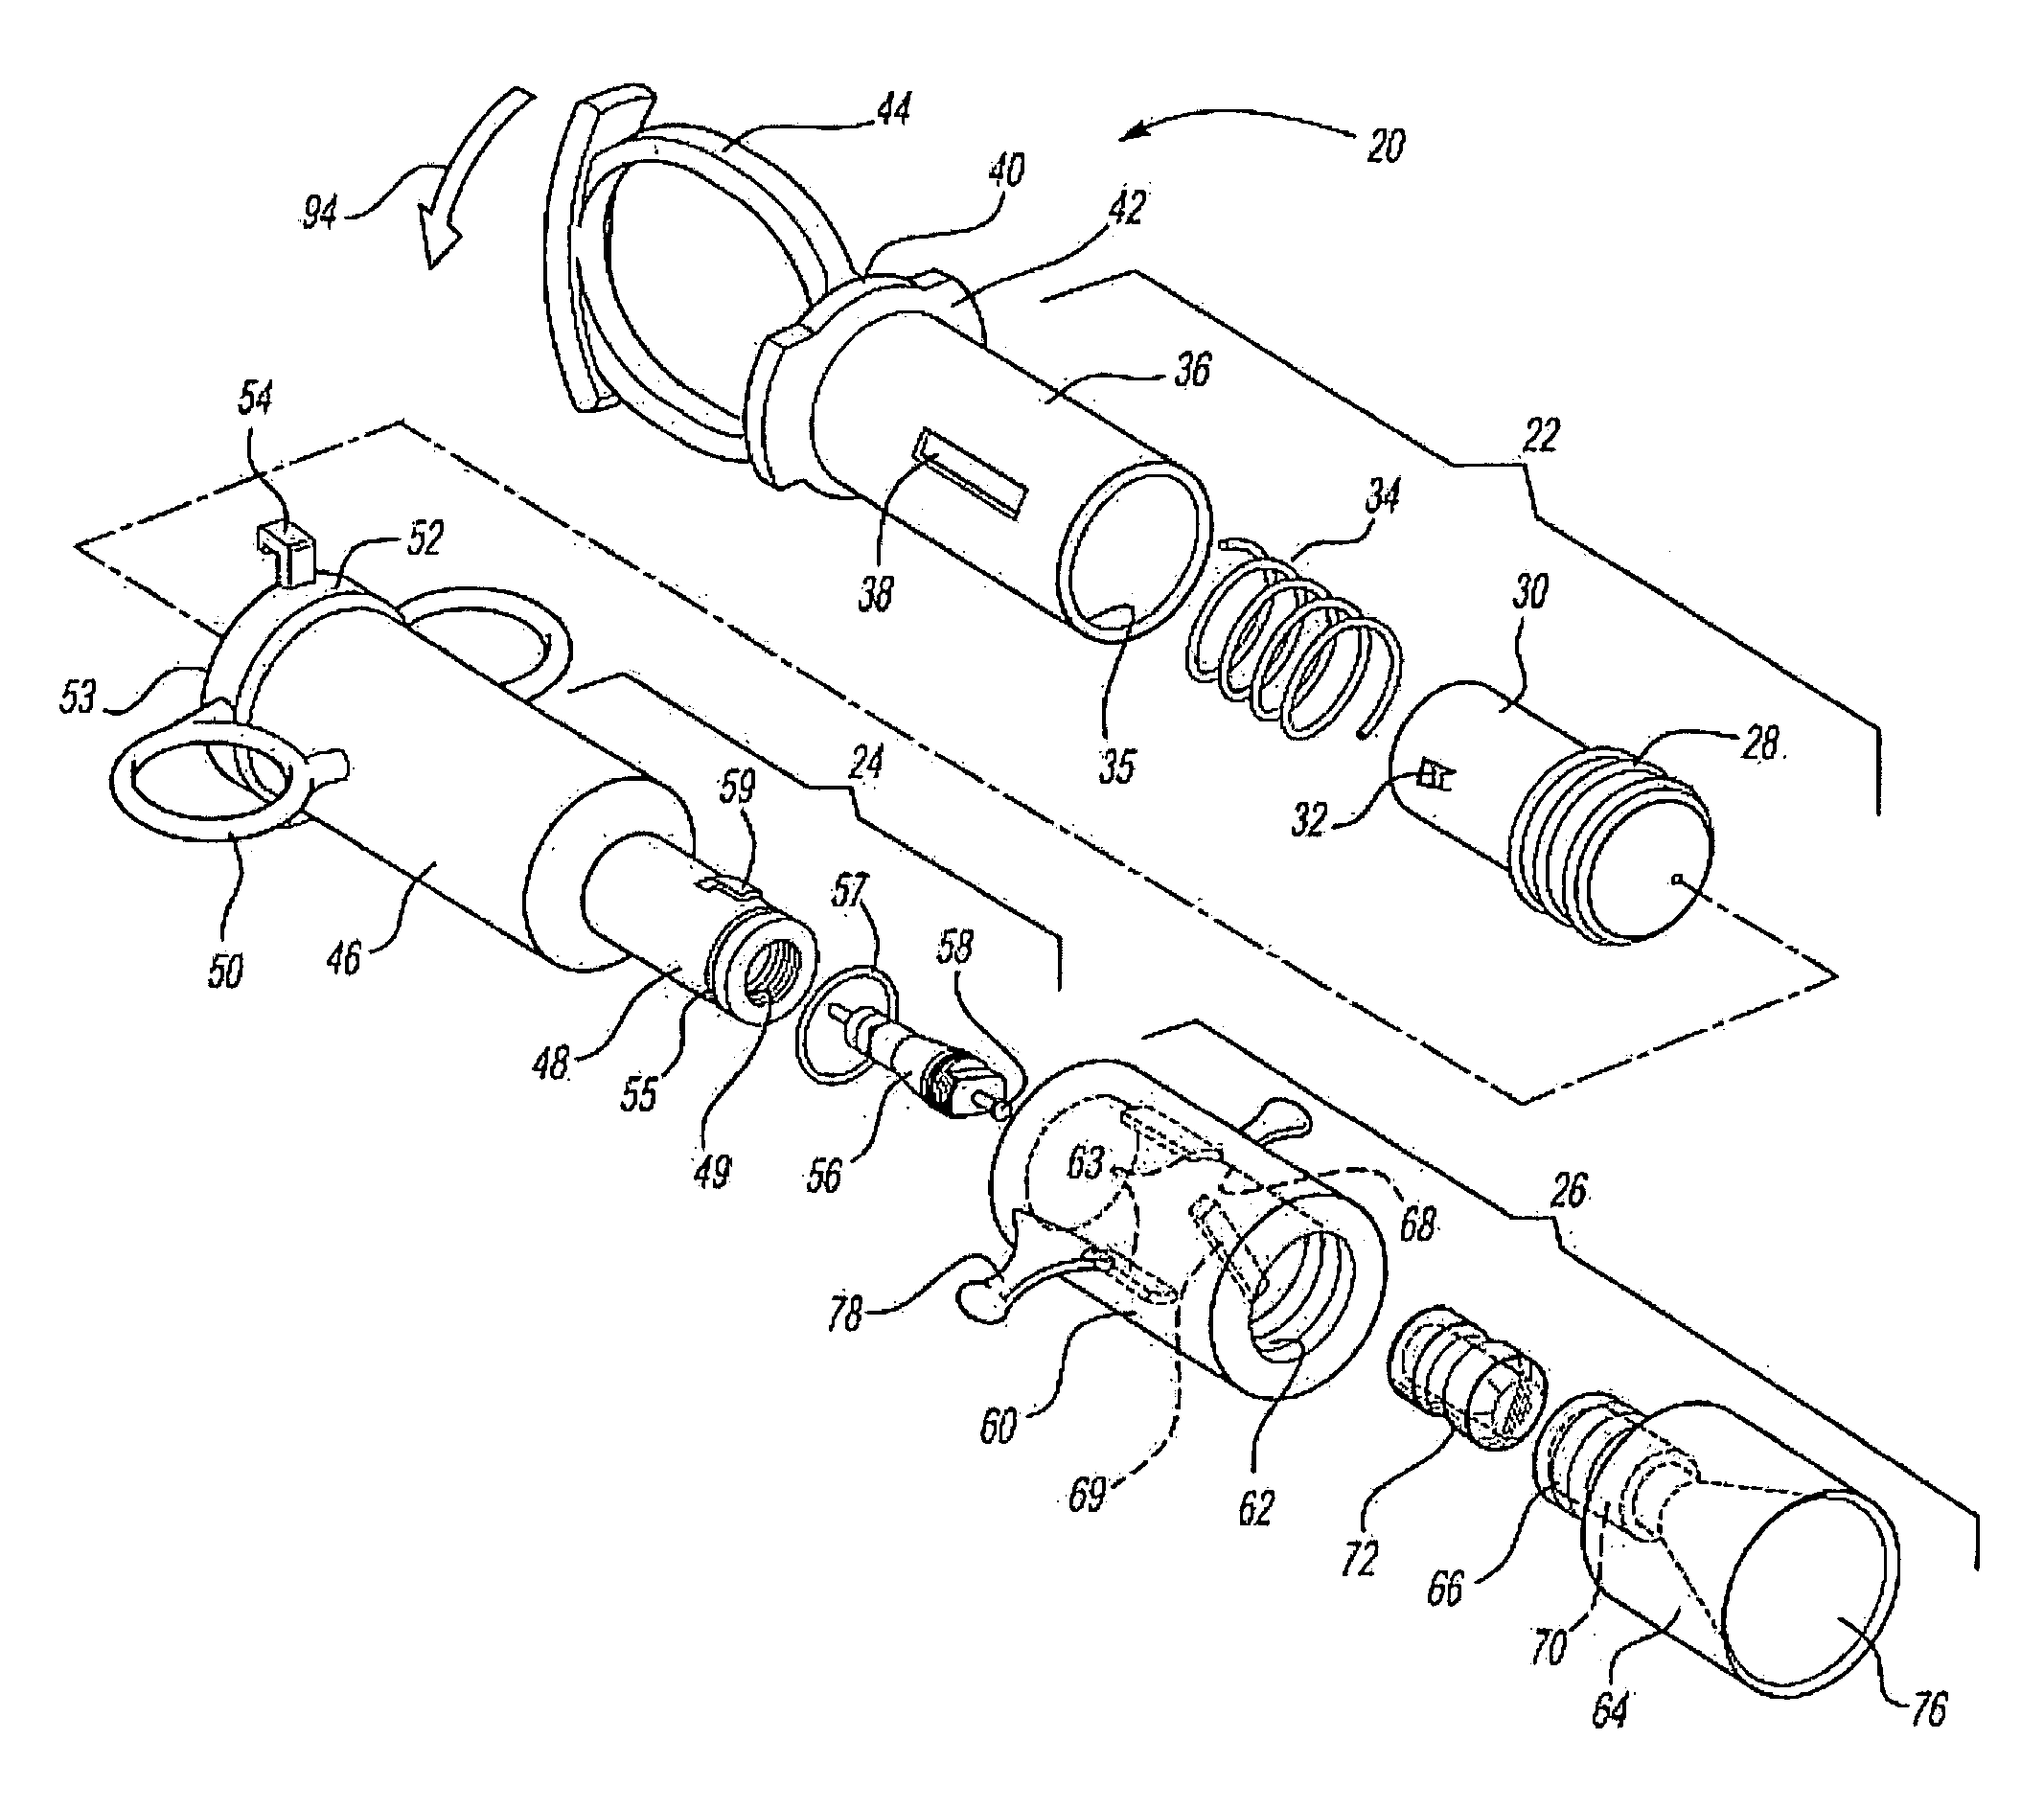 Medicament respiratory delivery device and method